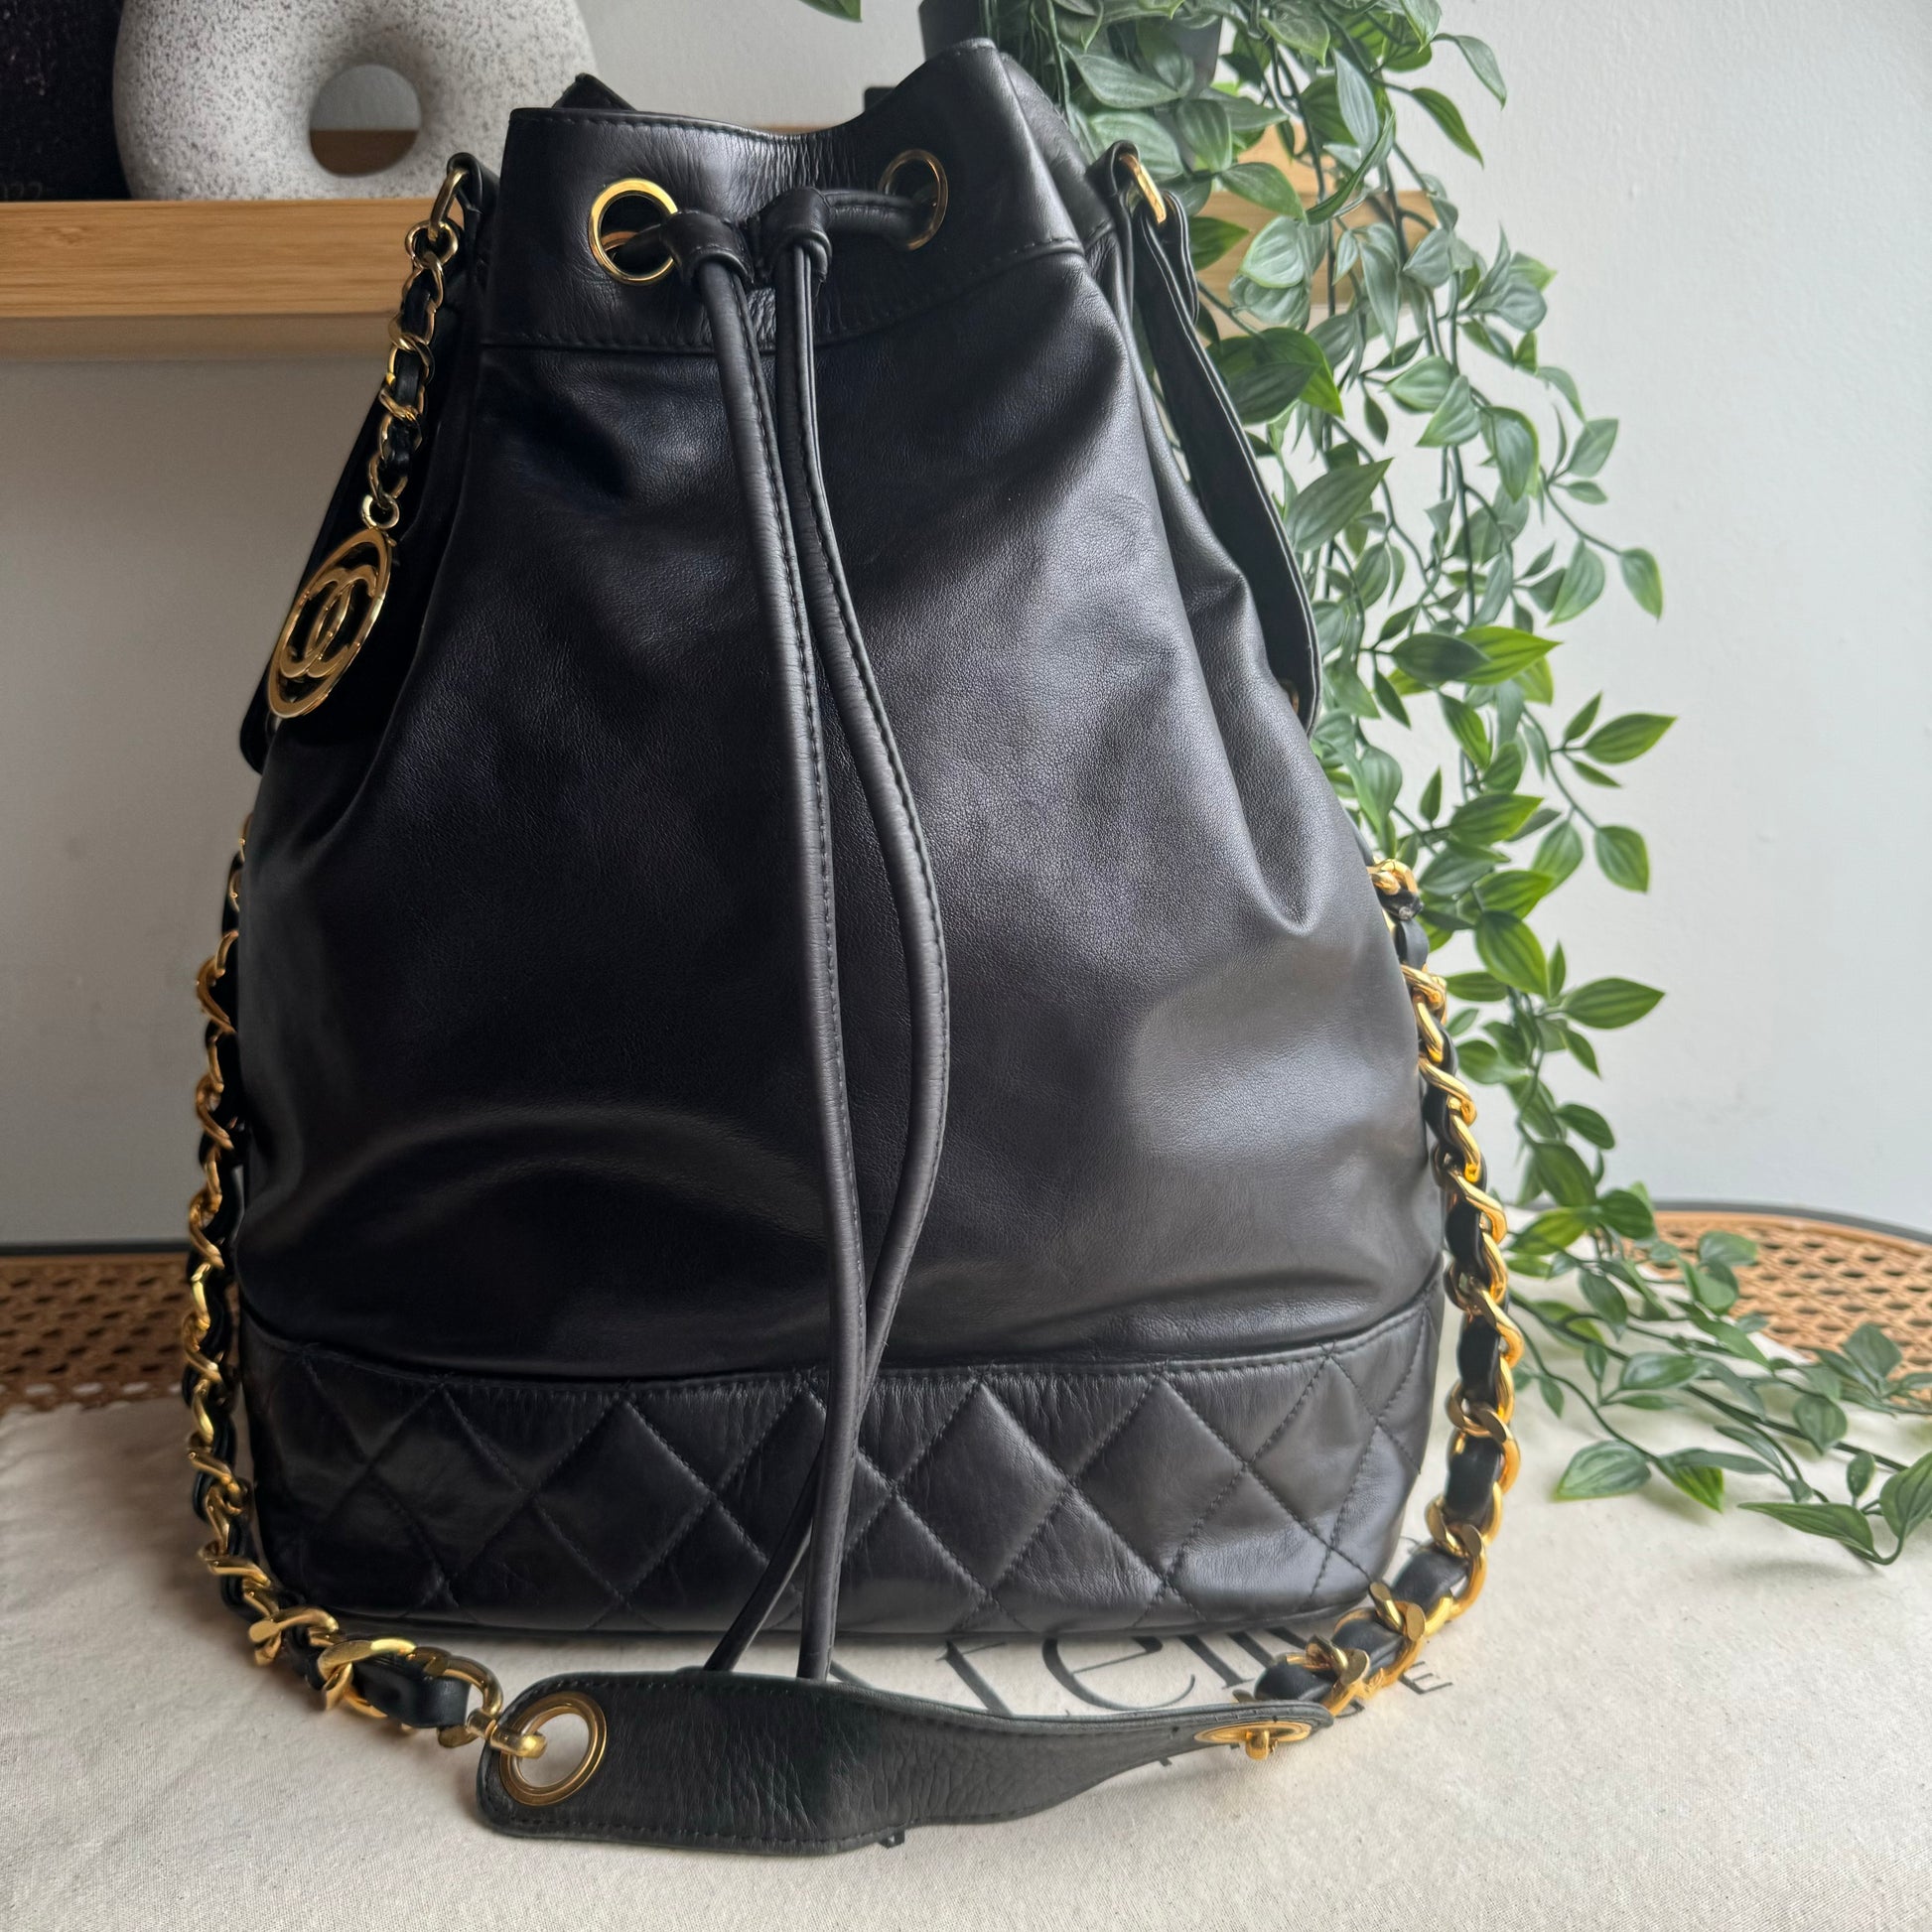 Chanel 1989 Vintage Bucket Bag with Pouch